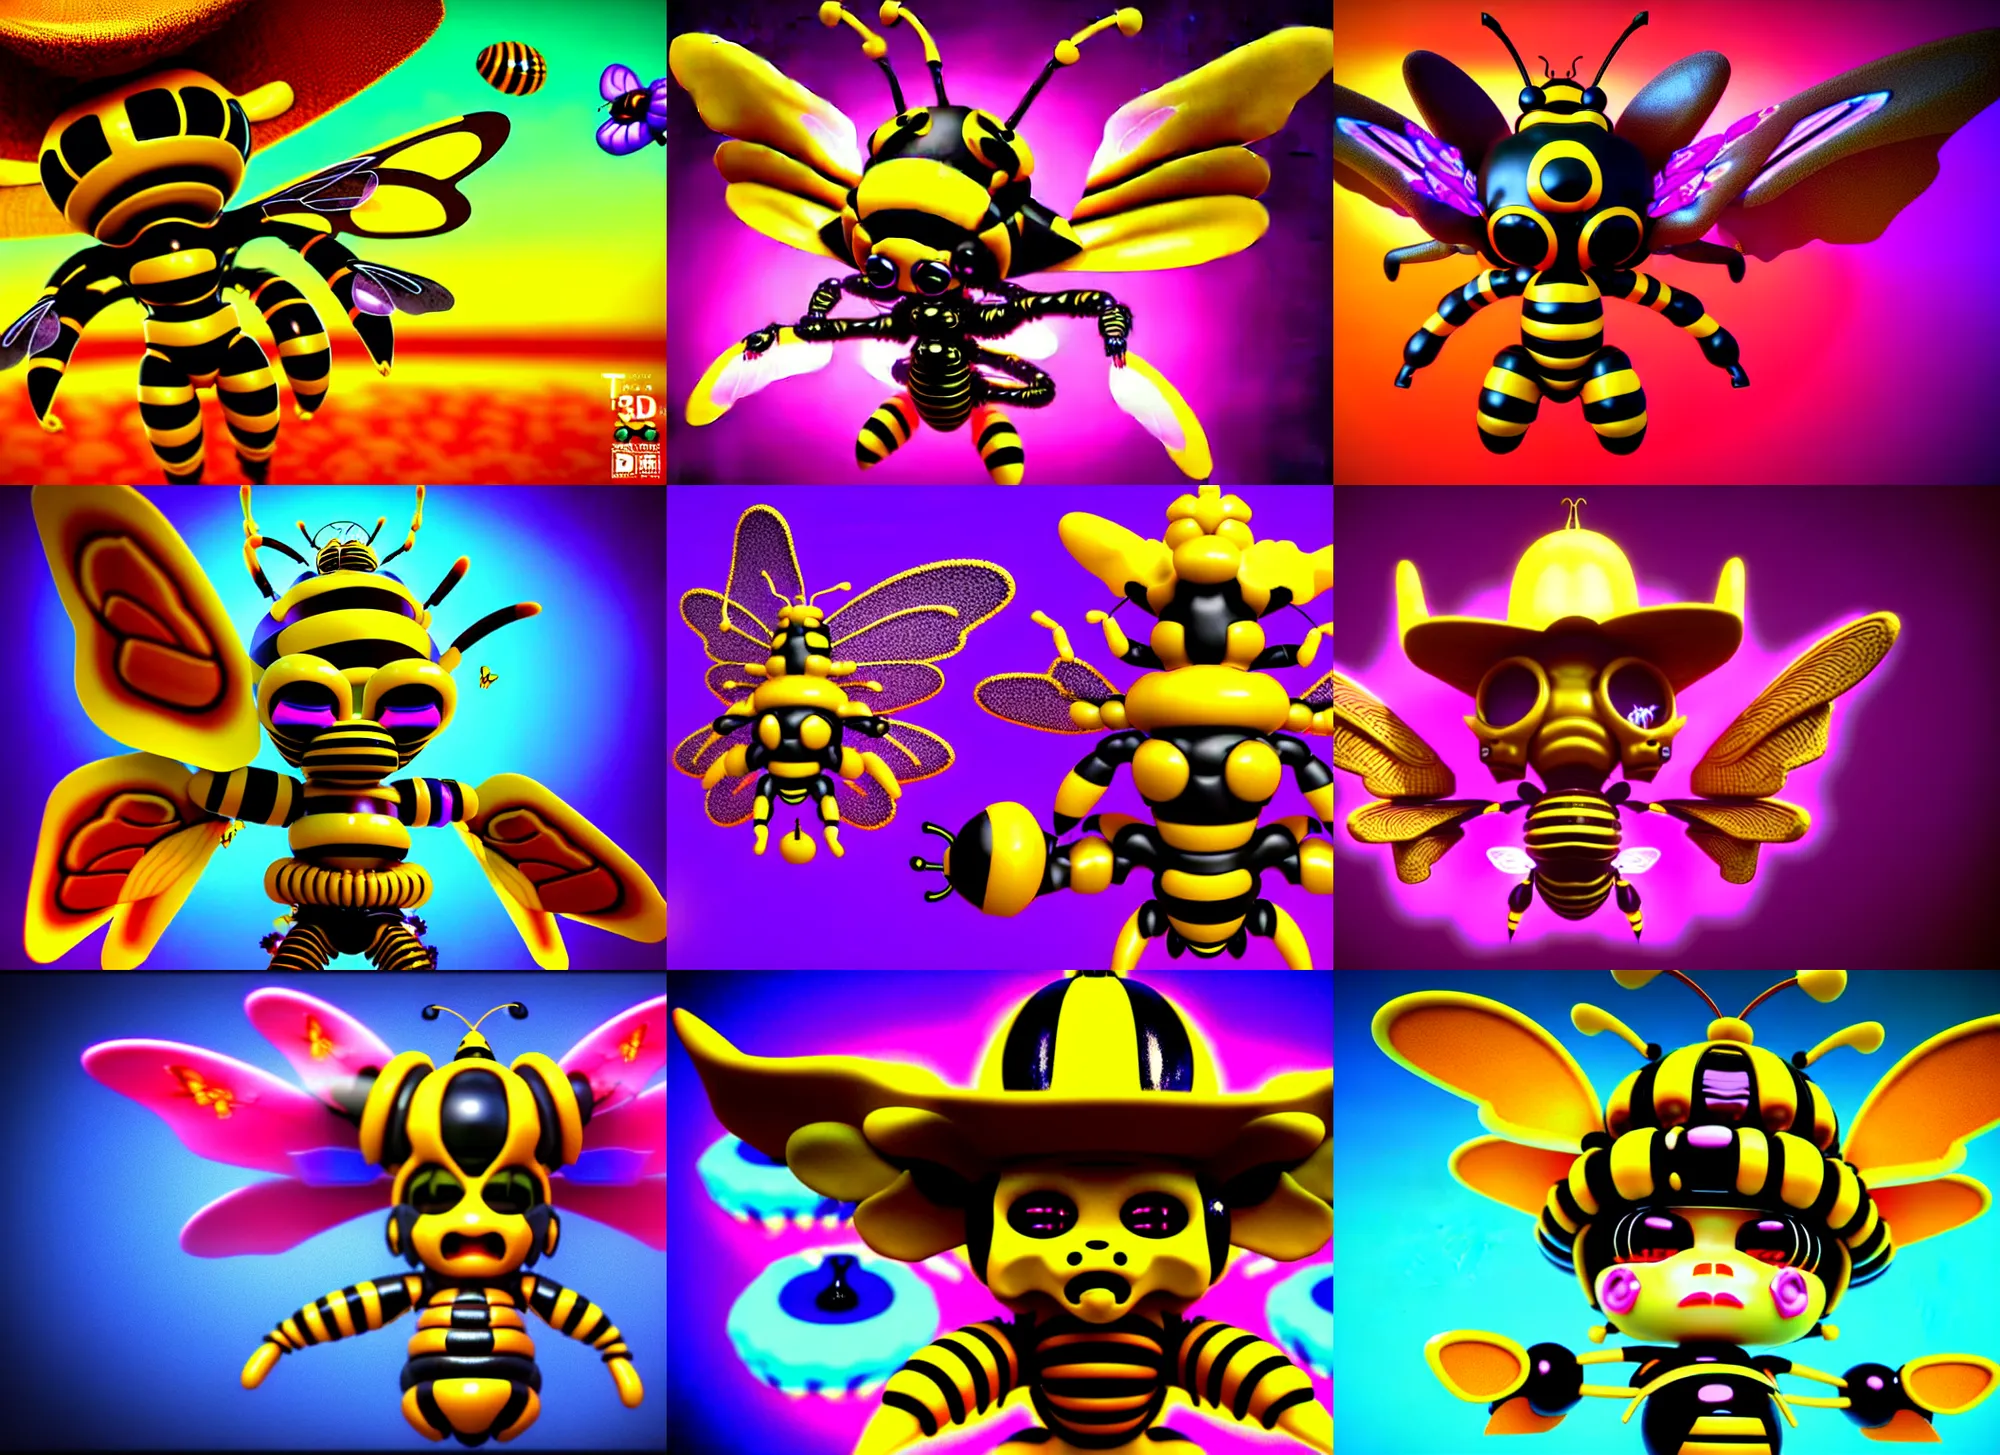 Prompt: 3 d render of chibi cyborg bee demon by ichiro tanida wearing a big cowboy hat hive mind and wearing angel wings against a psychedelic swirly background with 3 d butterflies and 3 d flowers n the style of 1 9 9 0's cg graphics 3 d rendered y 2 k aesthetic by ichiro tanida, 3 do magazine